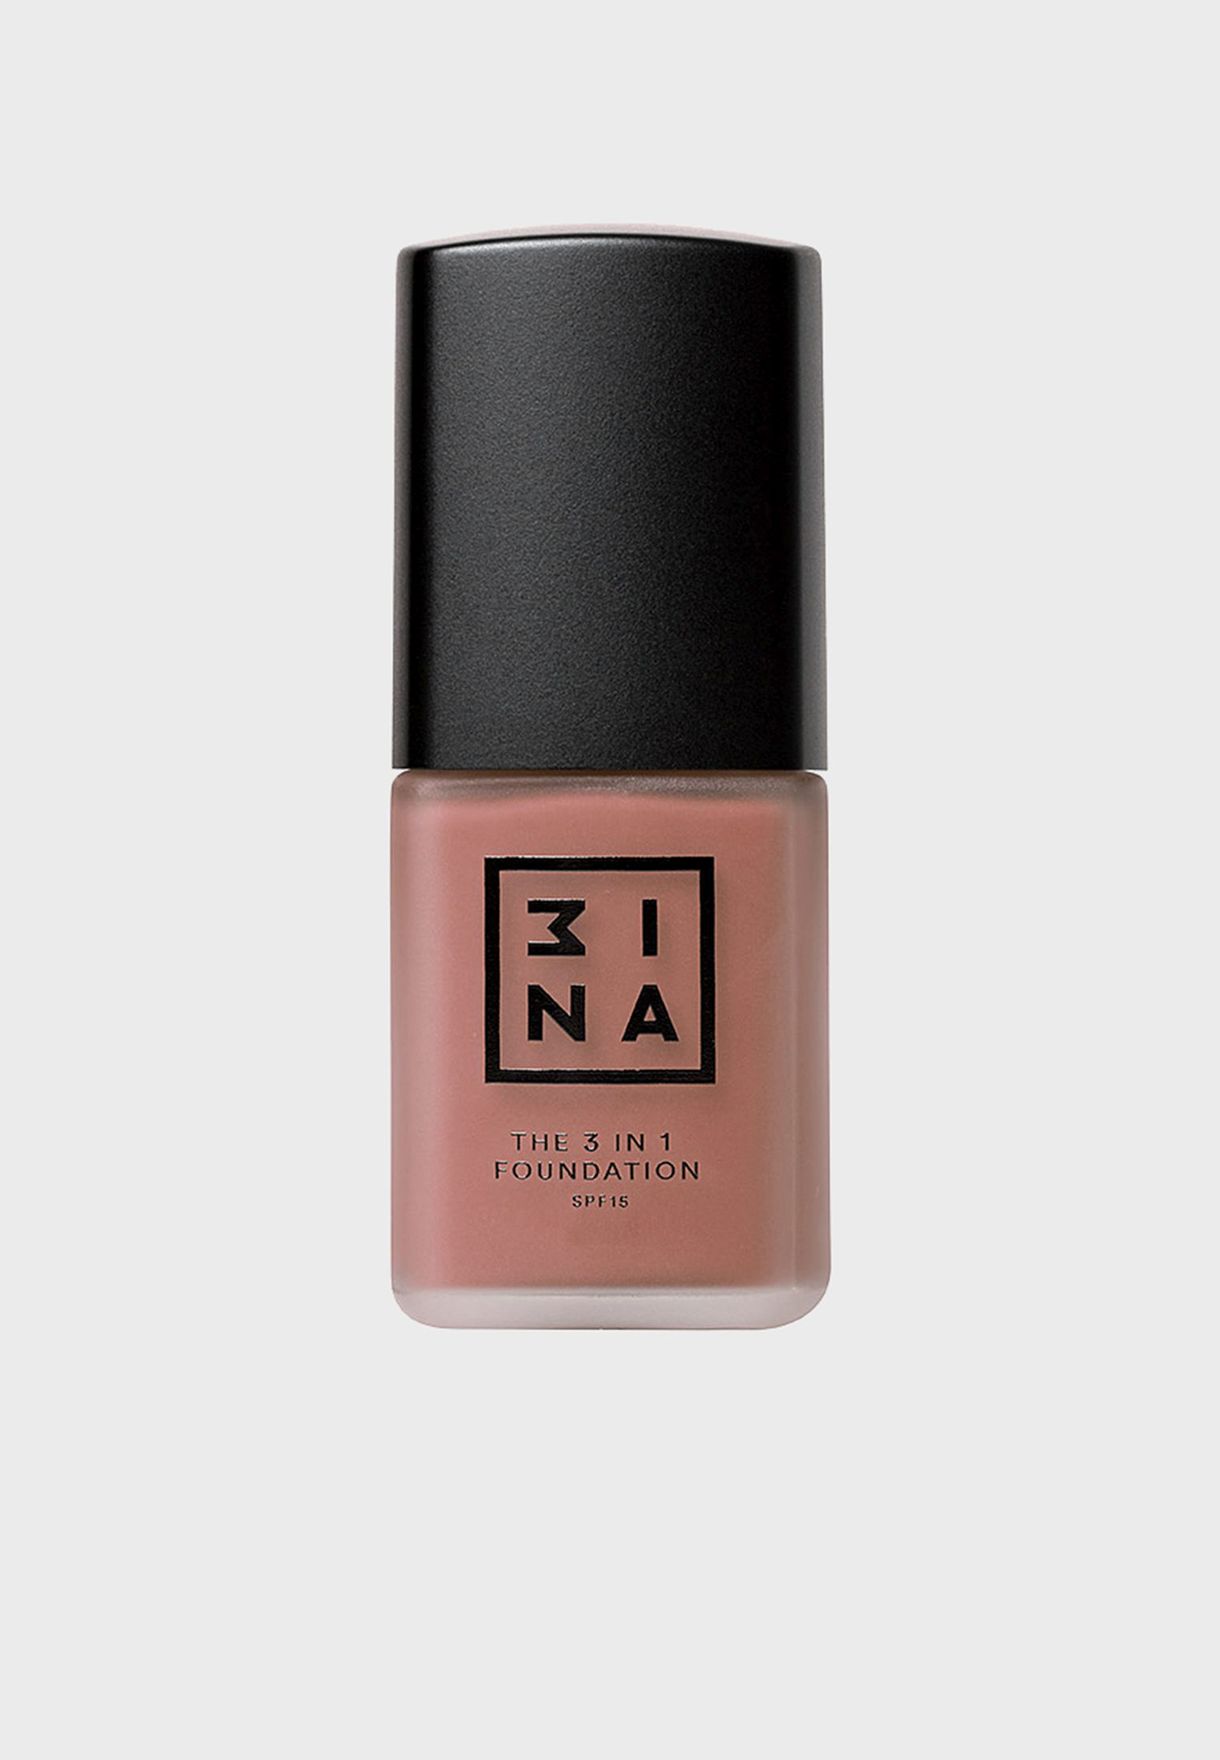 The 3-in-1 Foundation 222